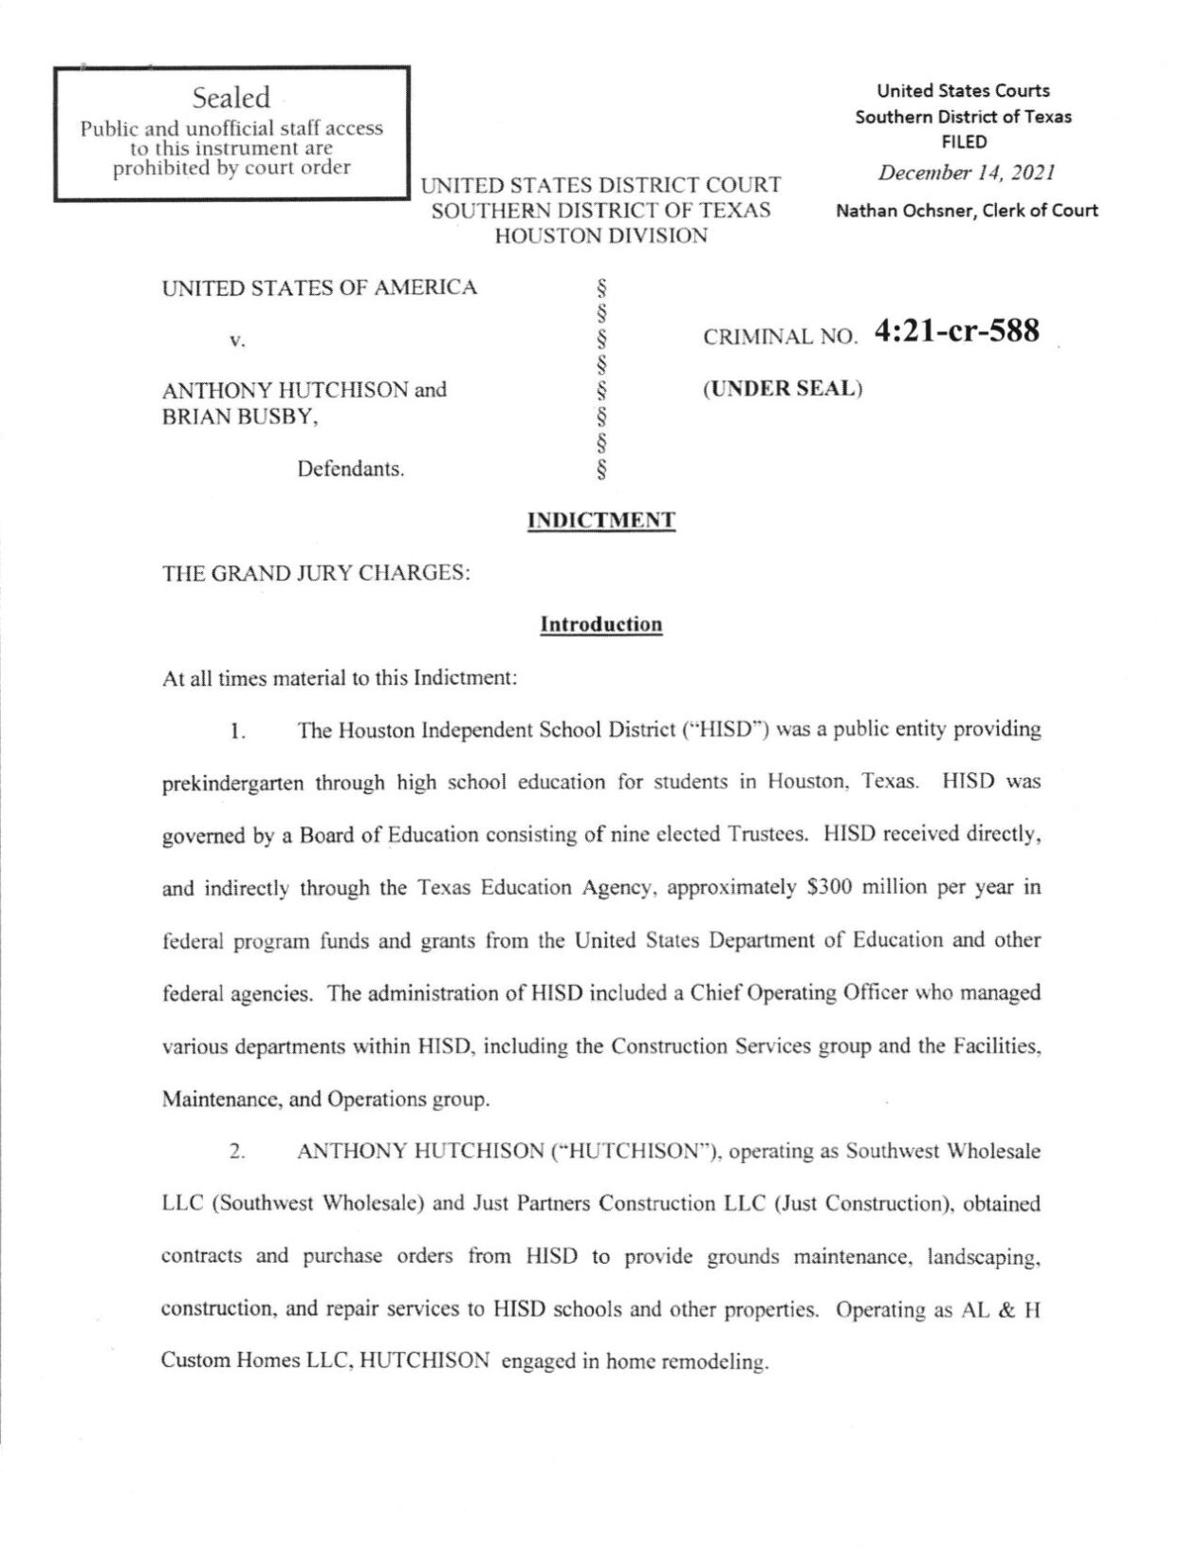 Busby-Hutchison HISD Indictment